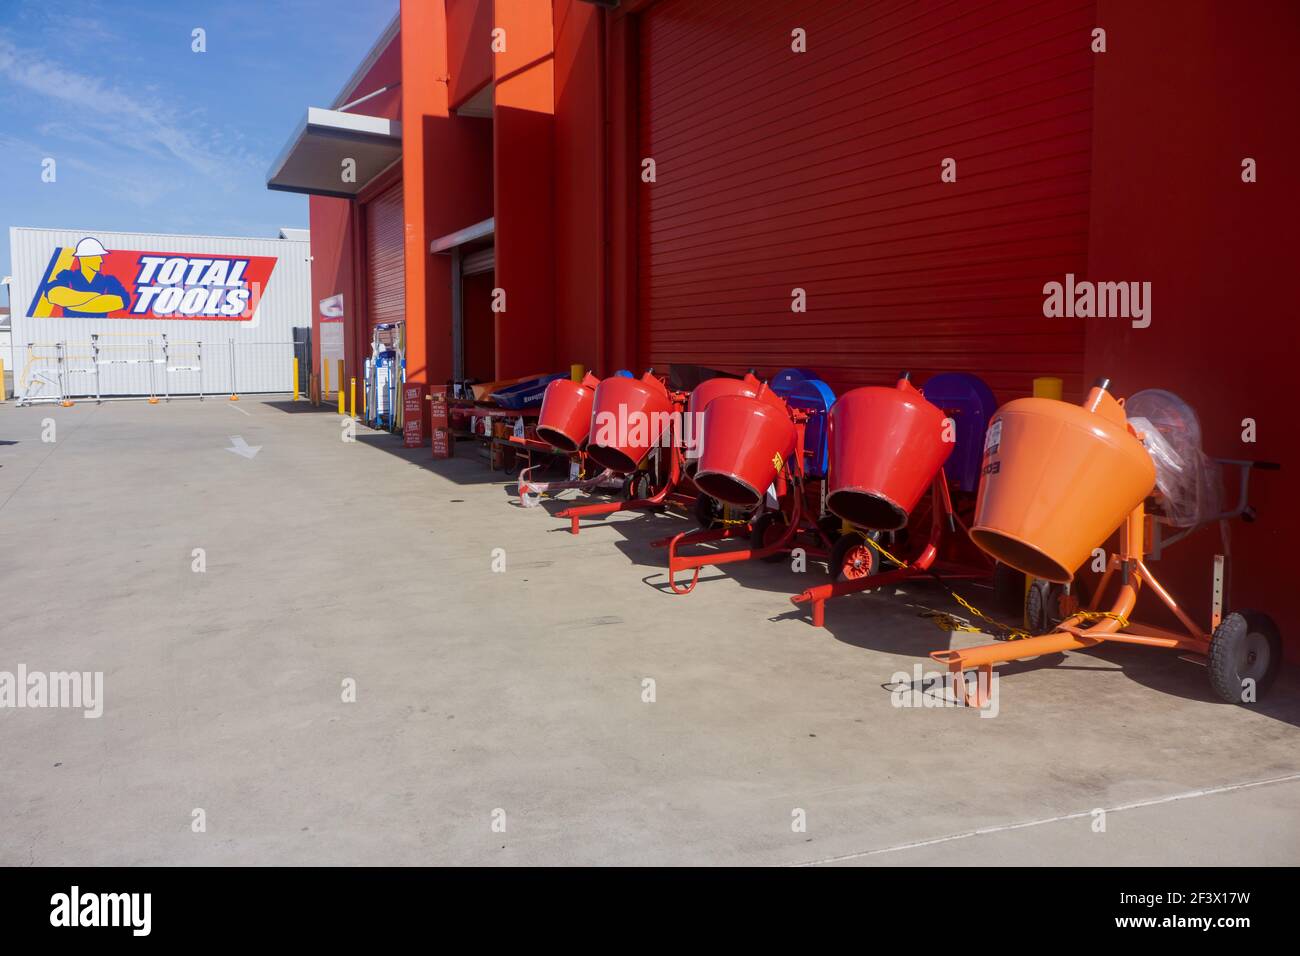 Total Tools Warehouse For Hardware And Tools With A Row Of Cement Mixers In Front Of A Red Wall In Mackay Queensland Australia With Copy Space Stock Photo Alamy